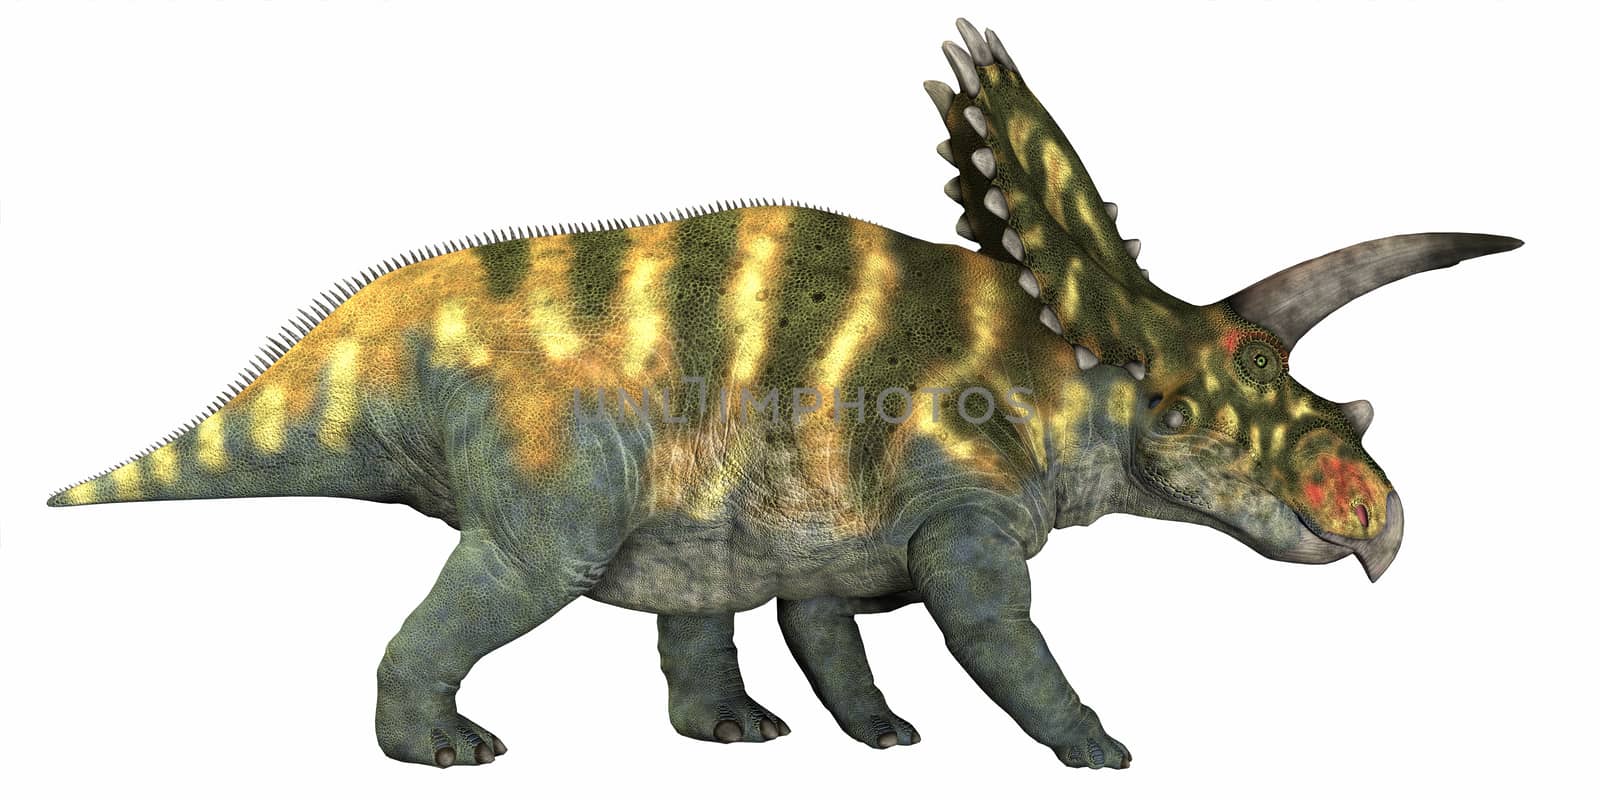 Coahuilaceratops was a herbivore that lived in the Cretaceous Era of Mexico.